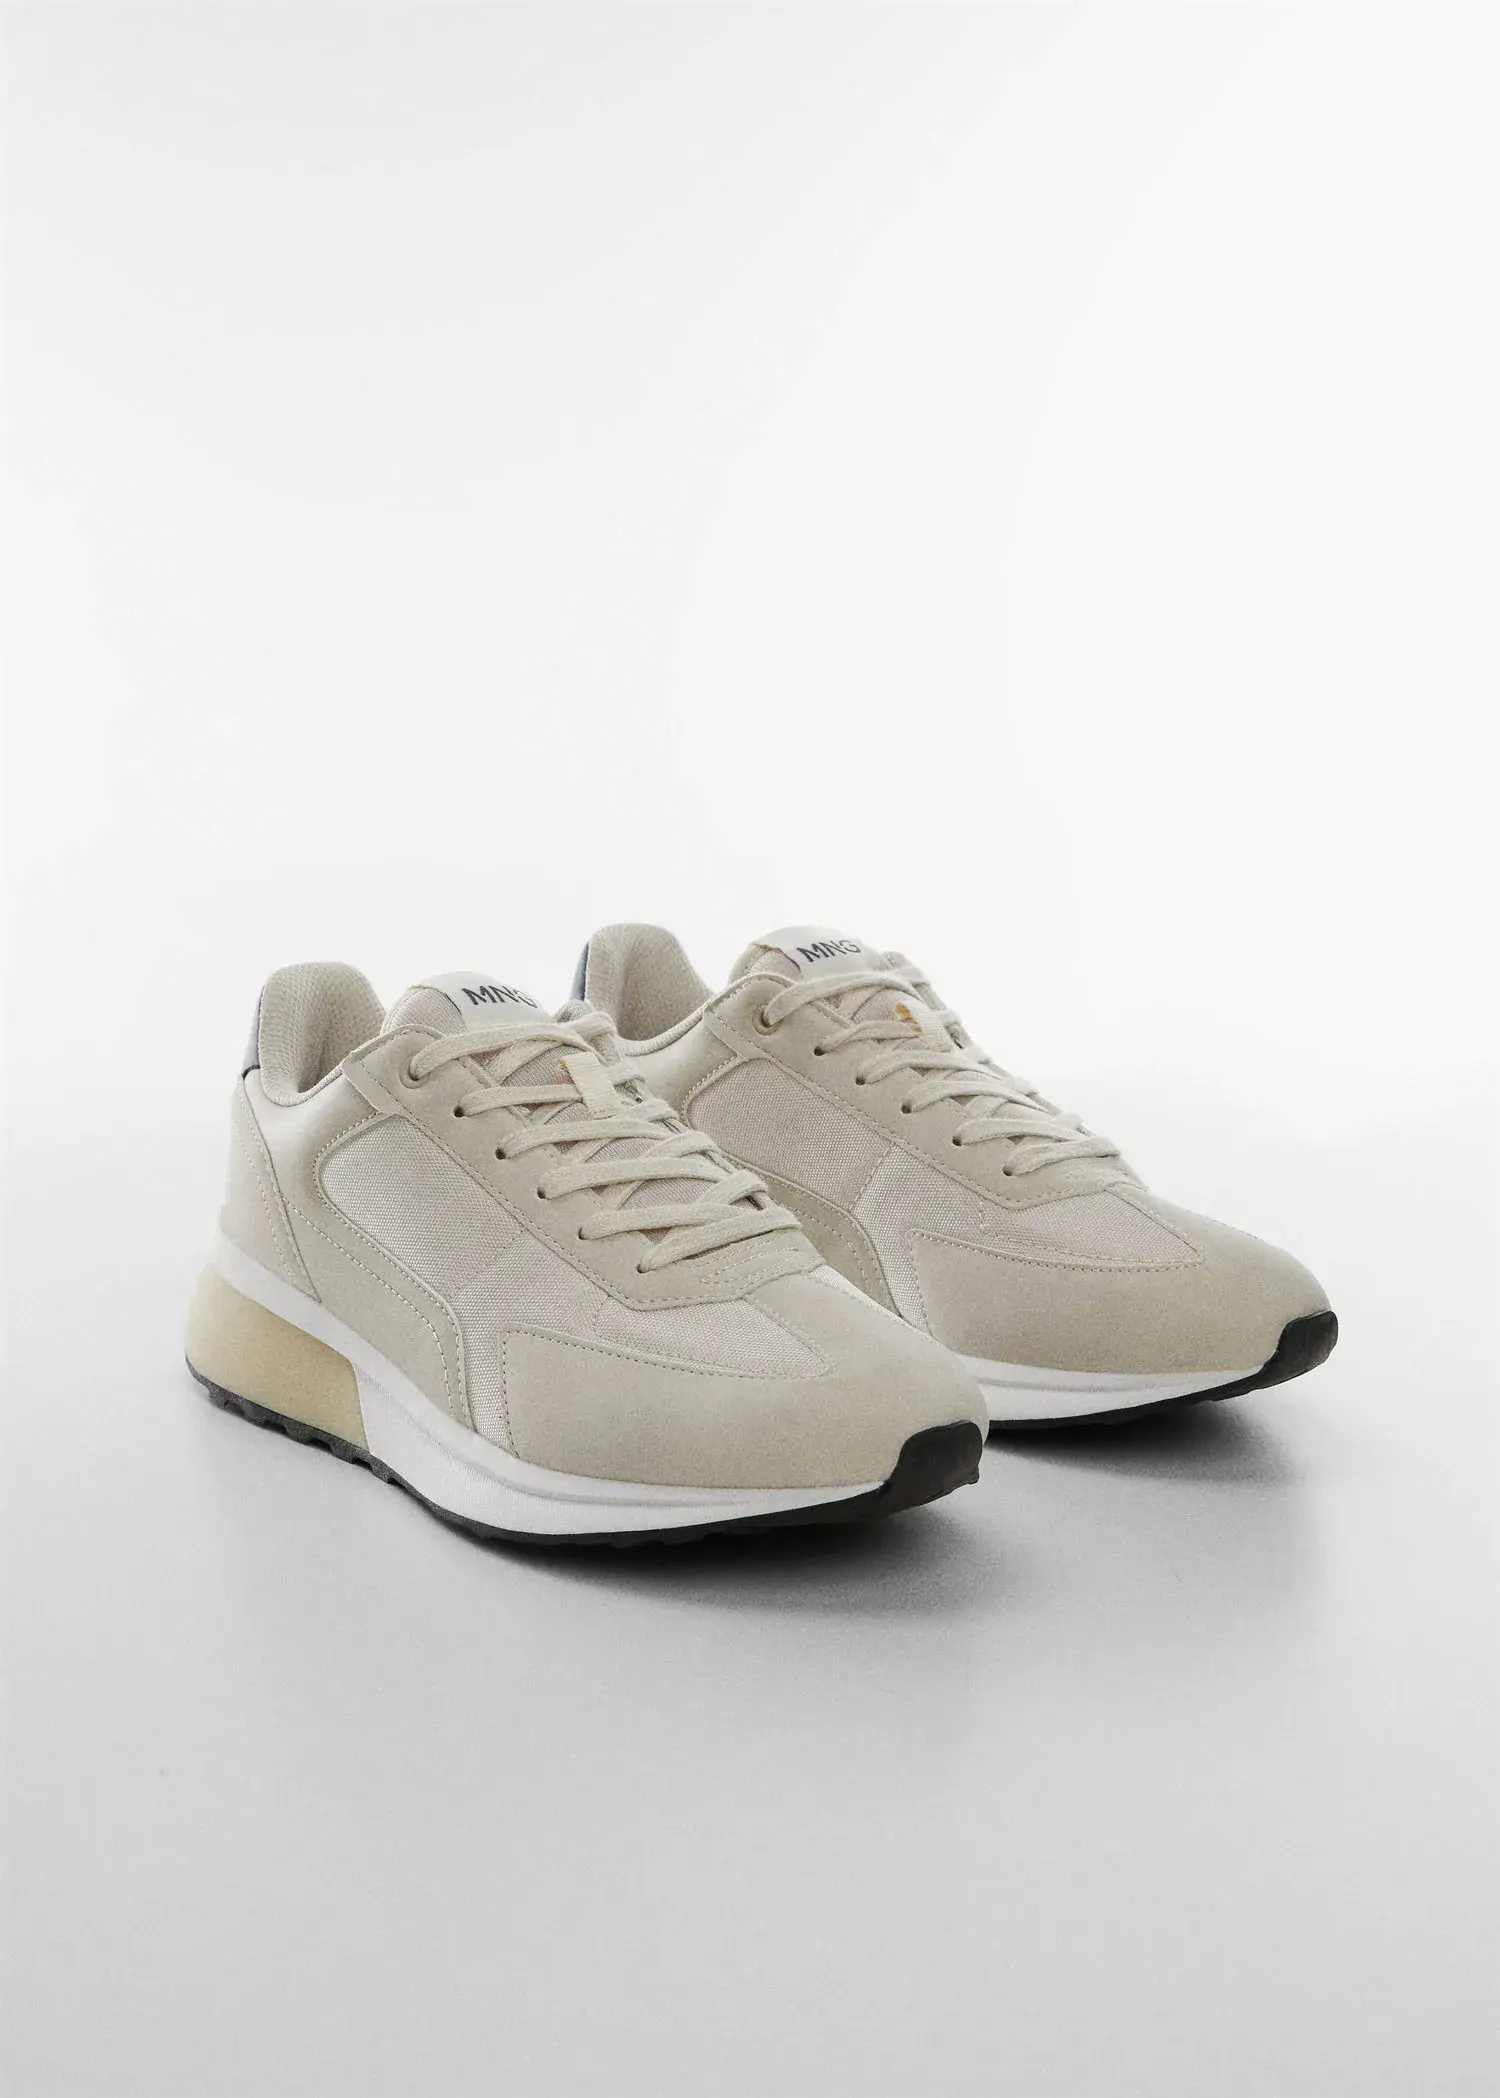 Mango Leather mixed sneakers. a pair of white sneakers on top of a white surface. 